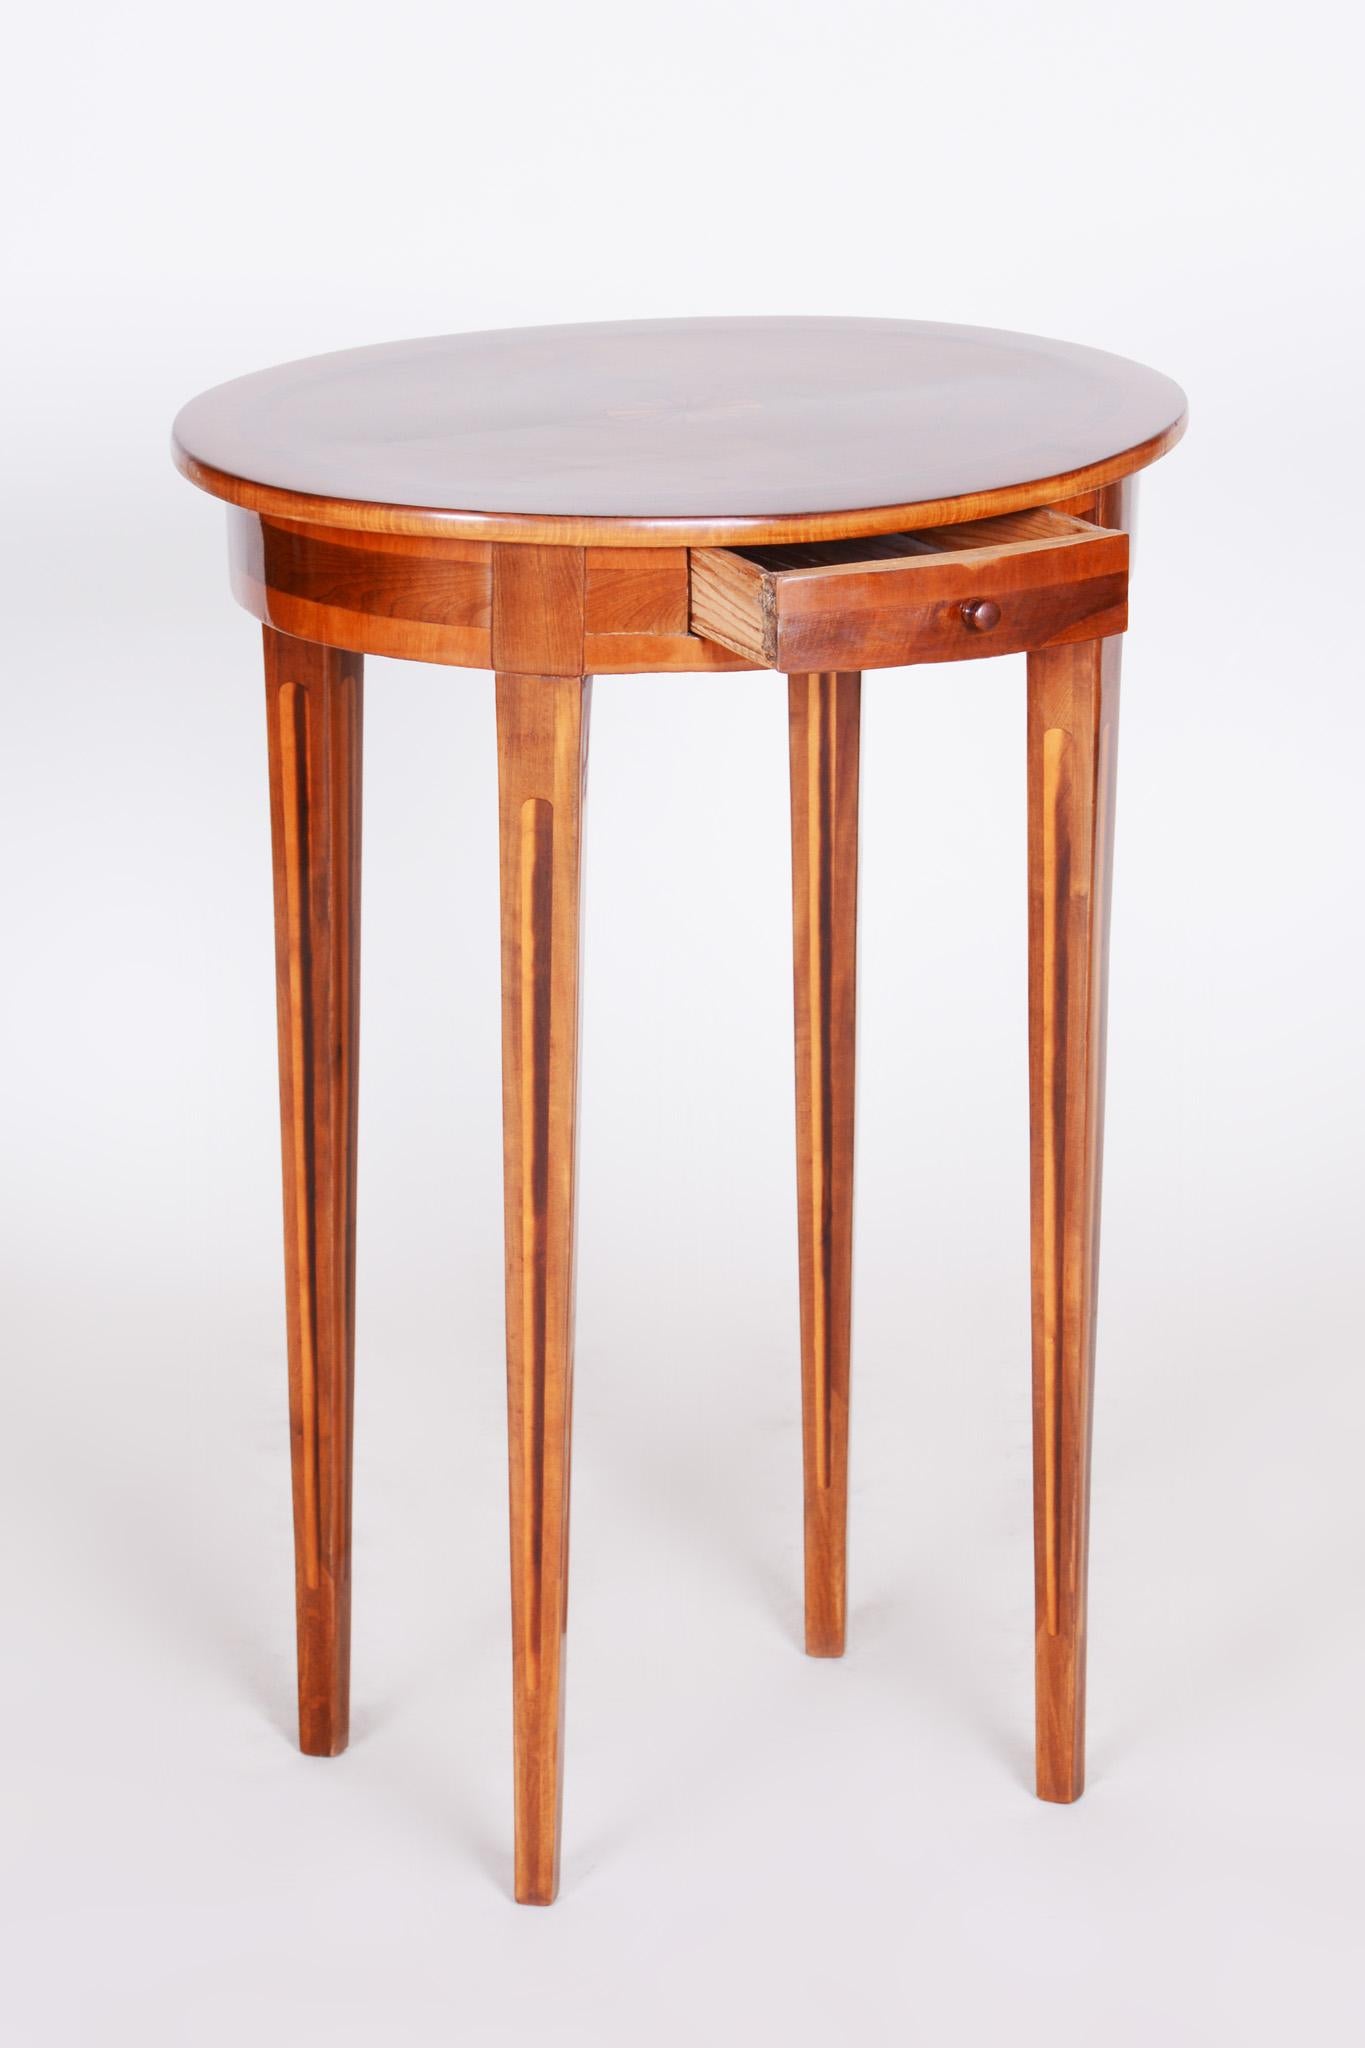 Italian Small Brown Yew-Tree Classicism Inlaid Table, Italy, 1810s, Shellac Polished For Sale